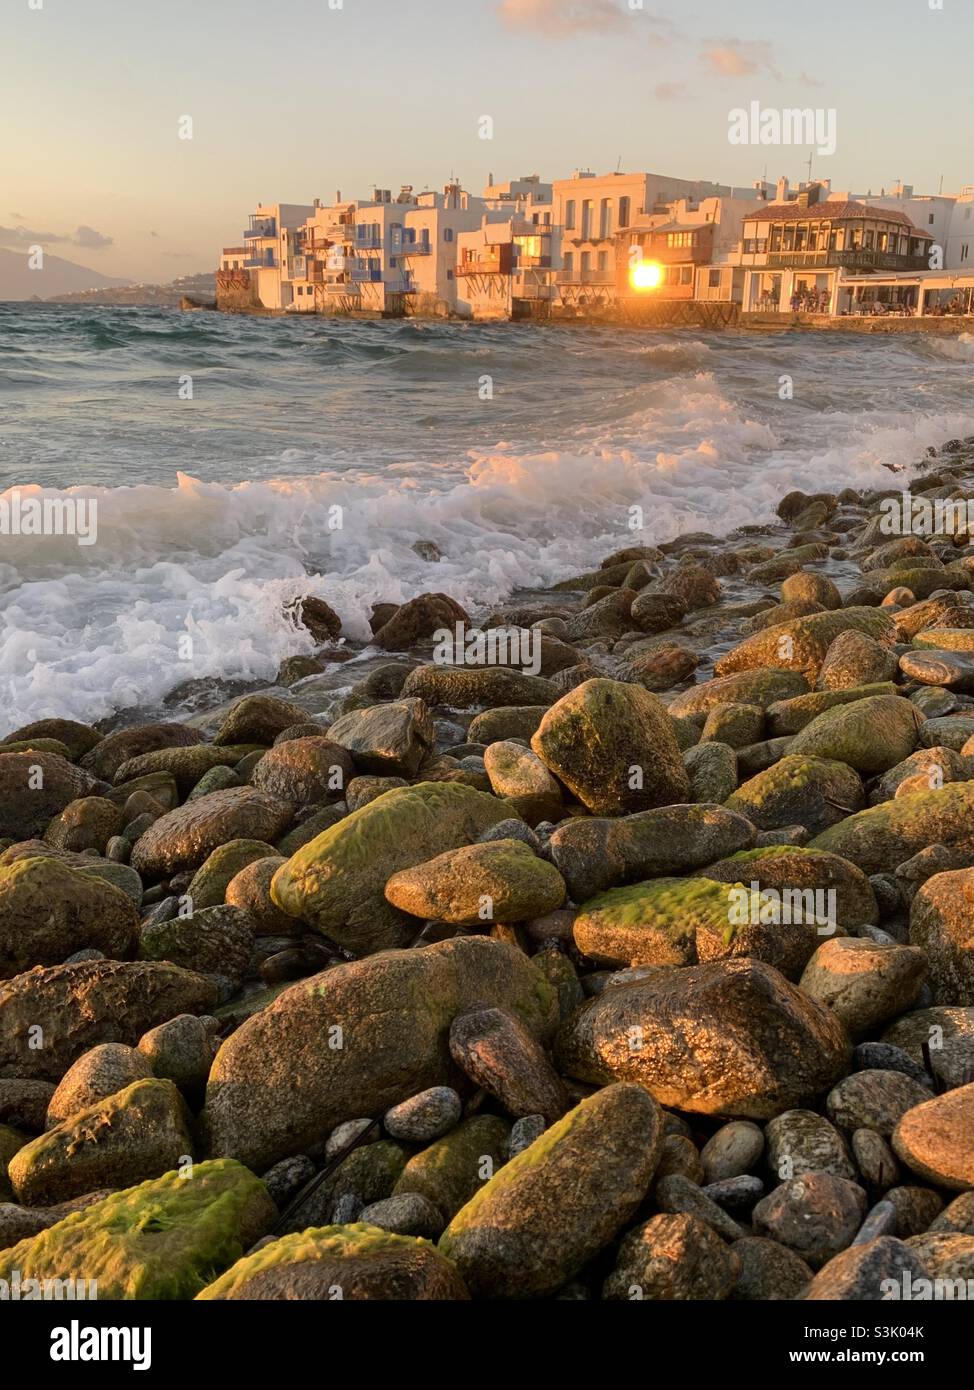 View from pebbly beach in Mykonos Greece at sunset Stock Photo